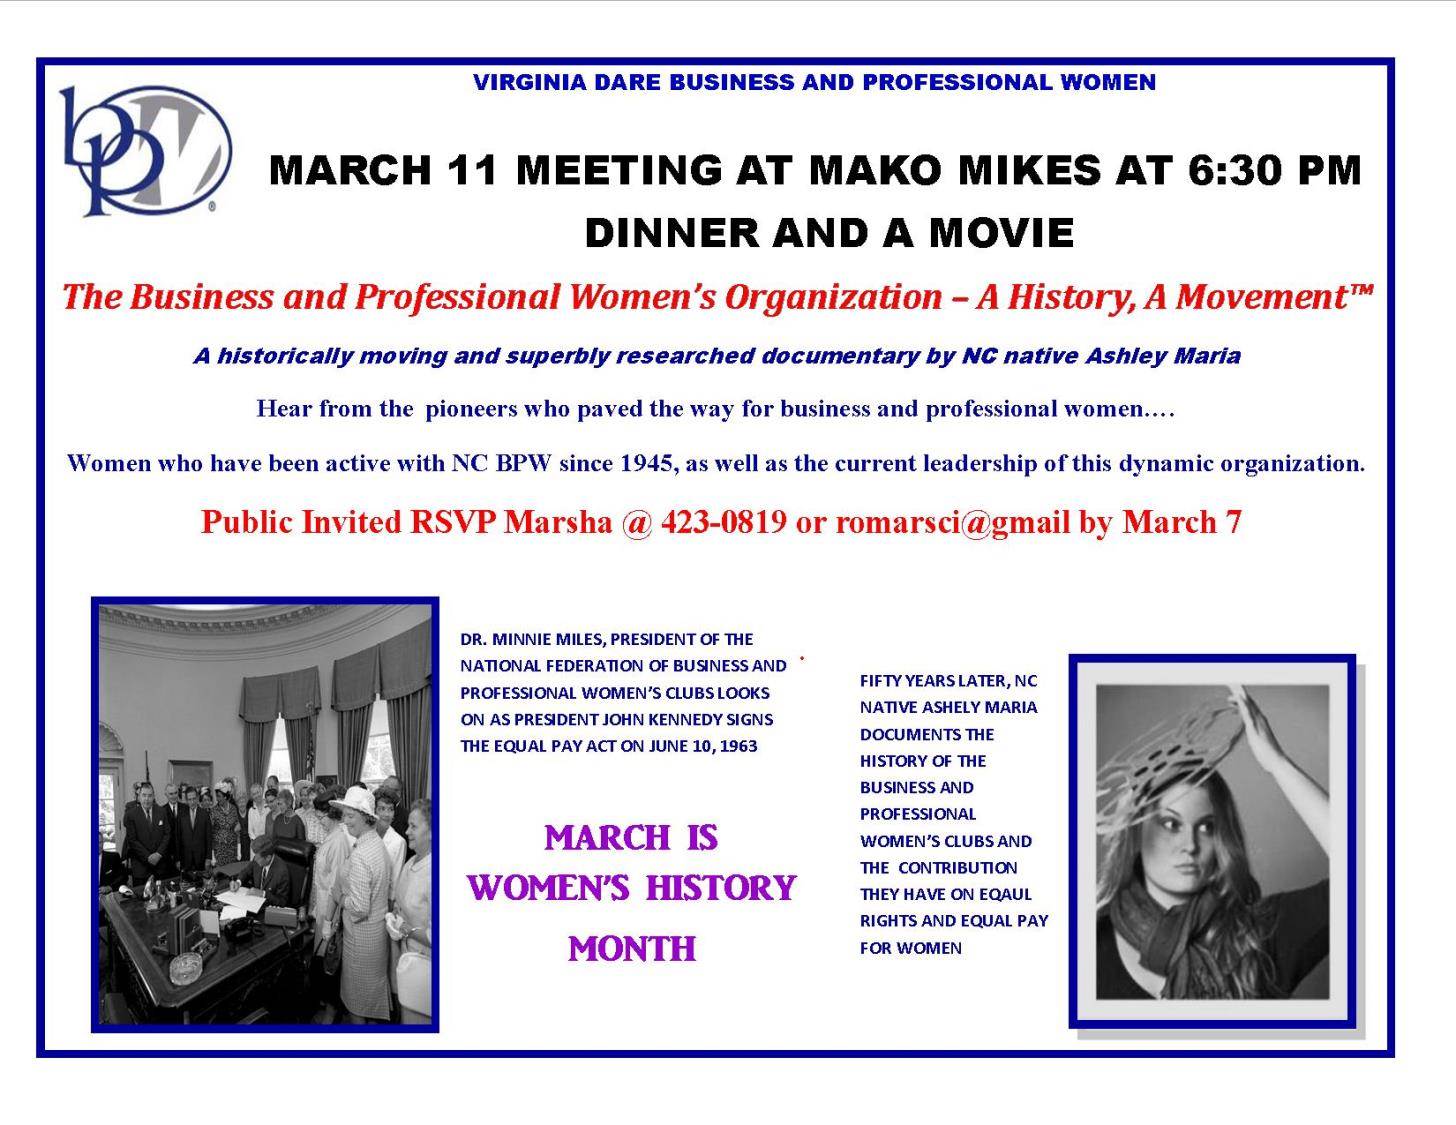 Film Screening for National Women's History Month